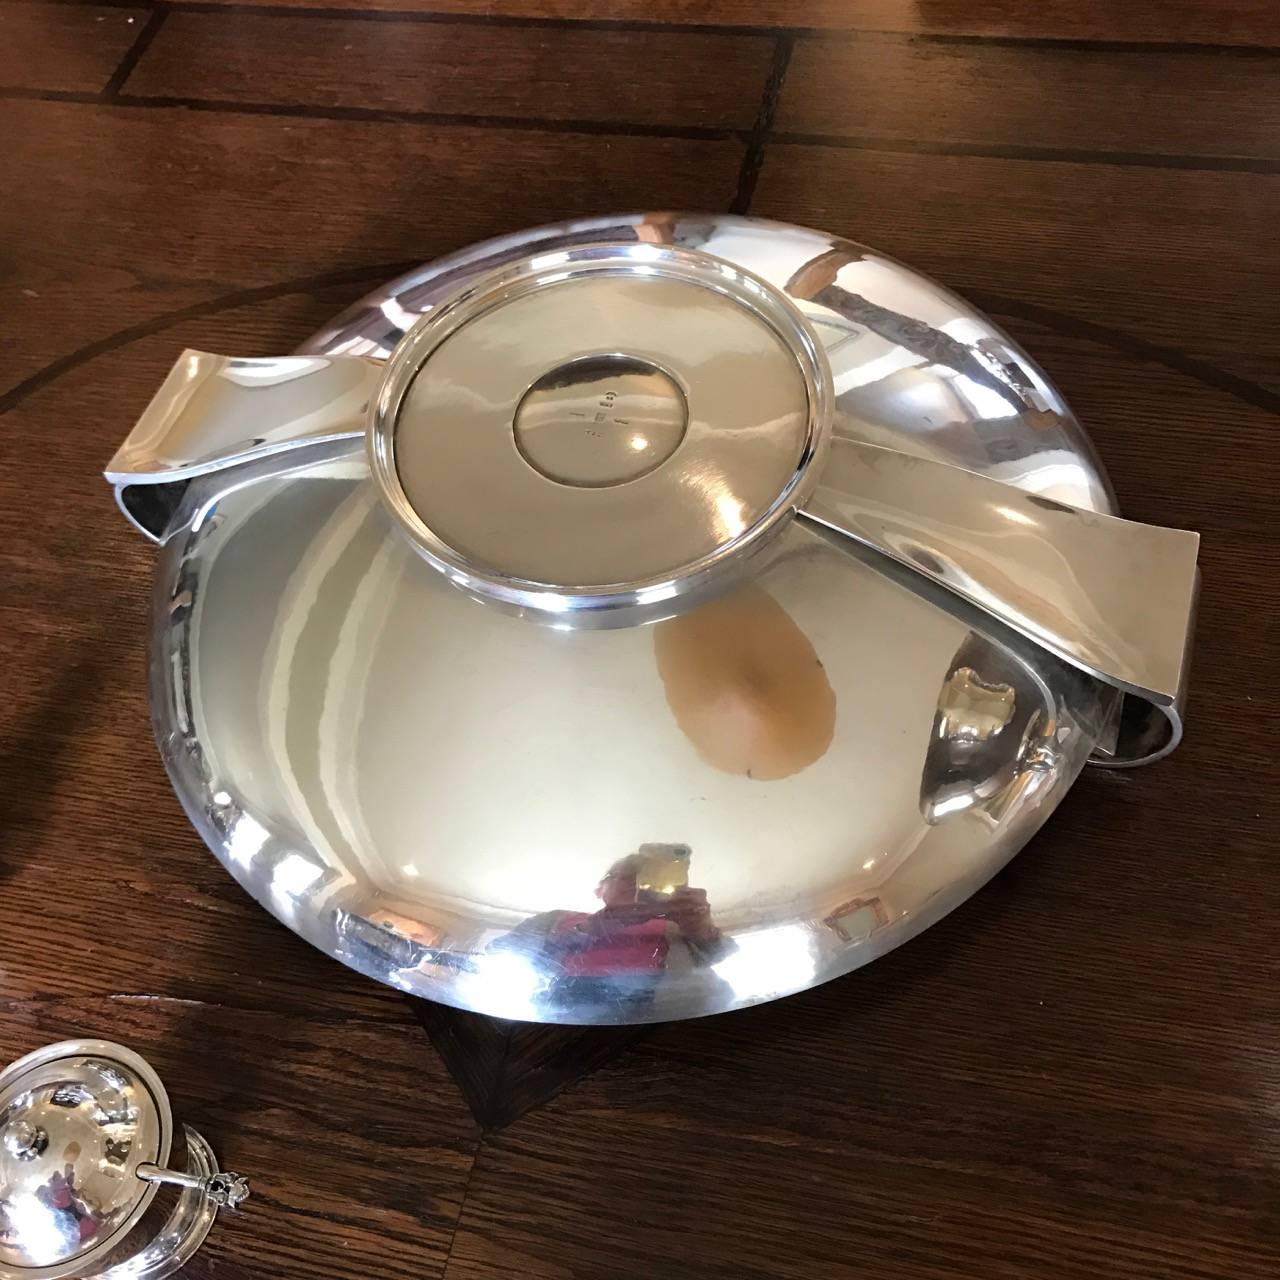 Georg Jensen Sterling Silver Monumental Centrepiece Bowl No. 752 by Harald Niels In Good Condition For Sale In San Francisco, CA